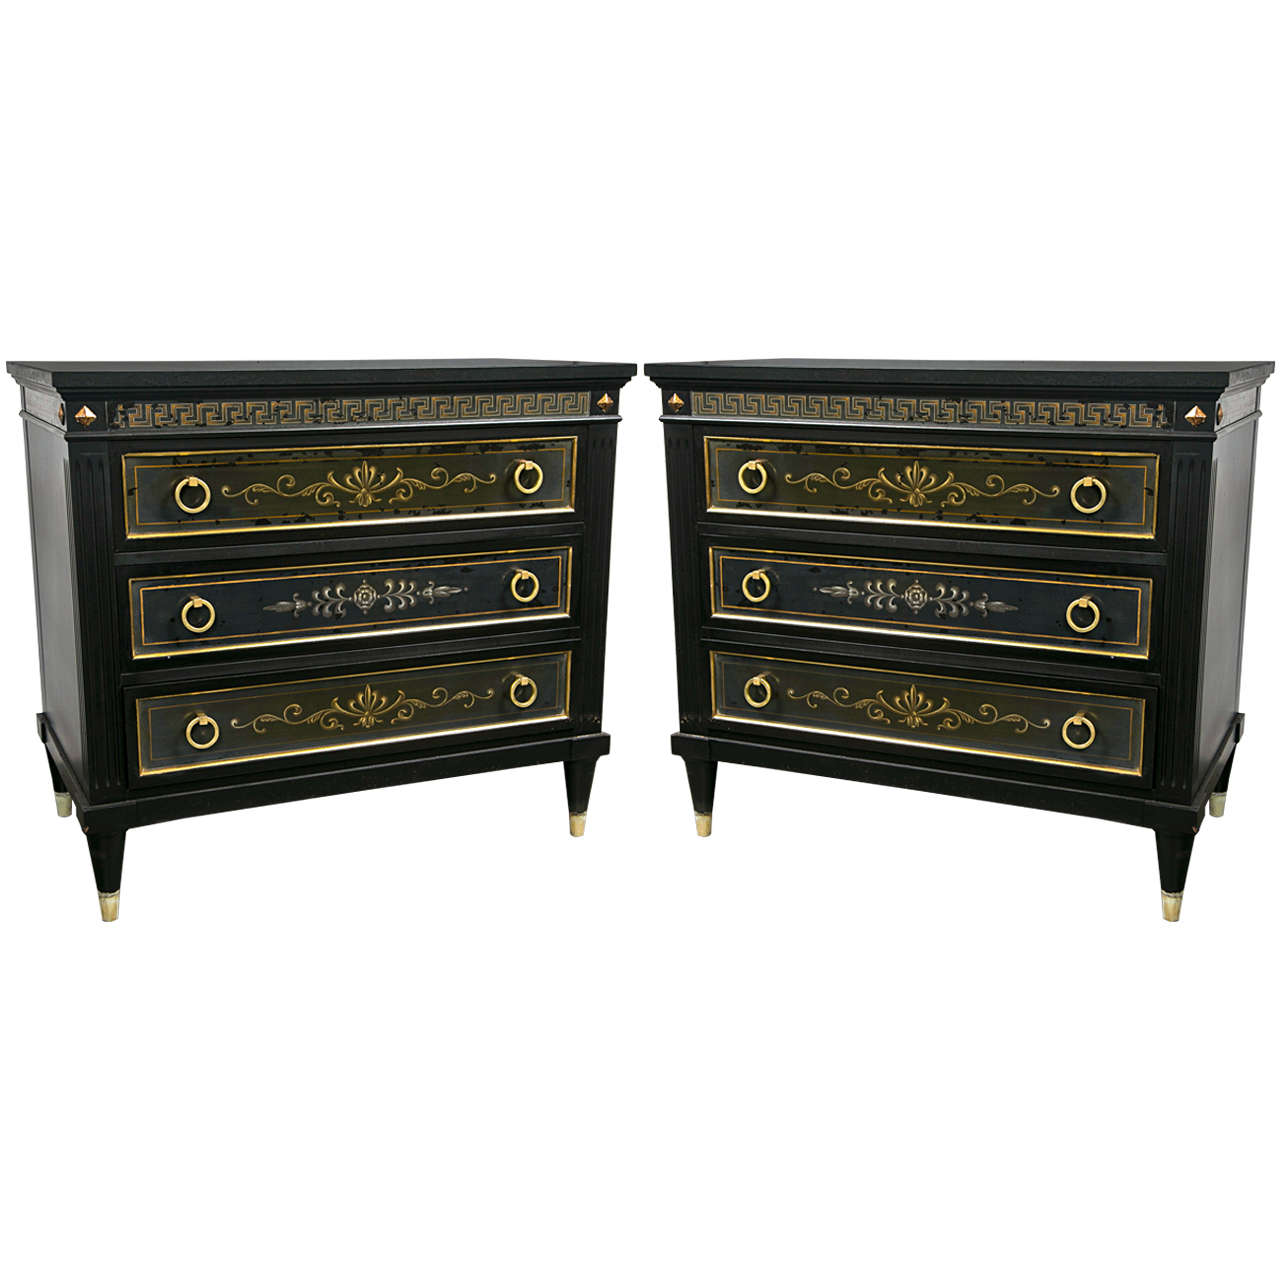 Pair of Ebonized Greek Key Design Commodes by Karges